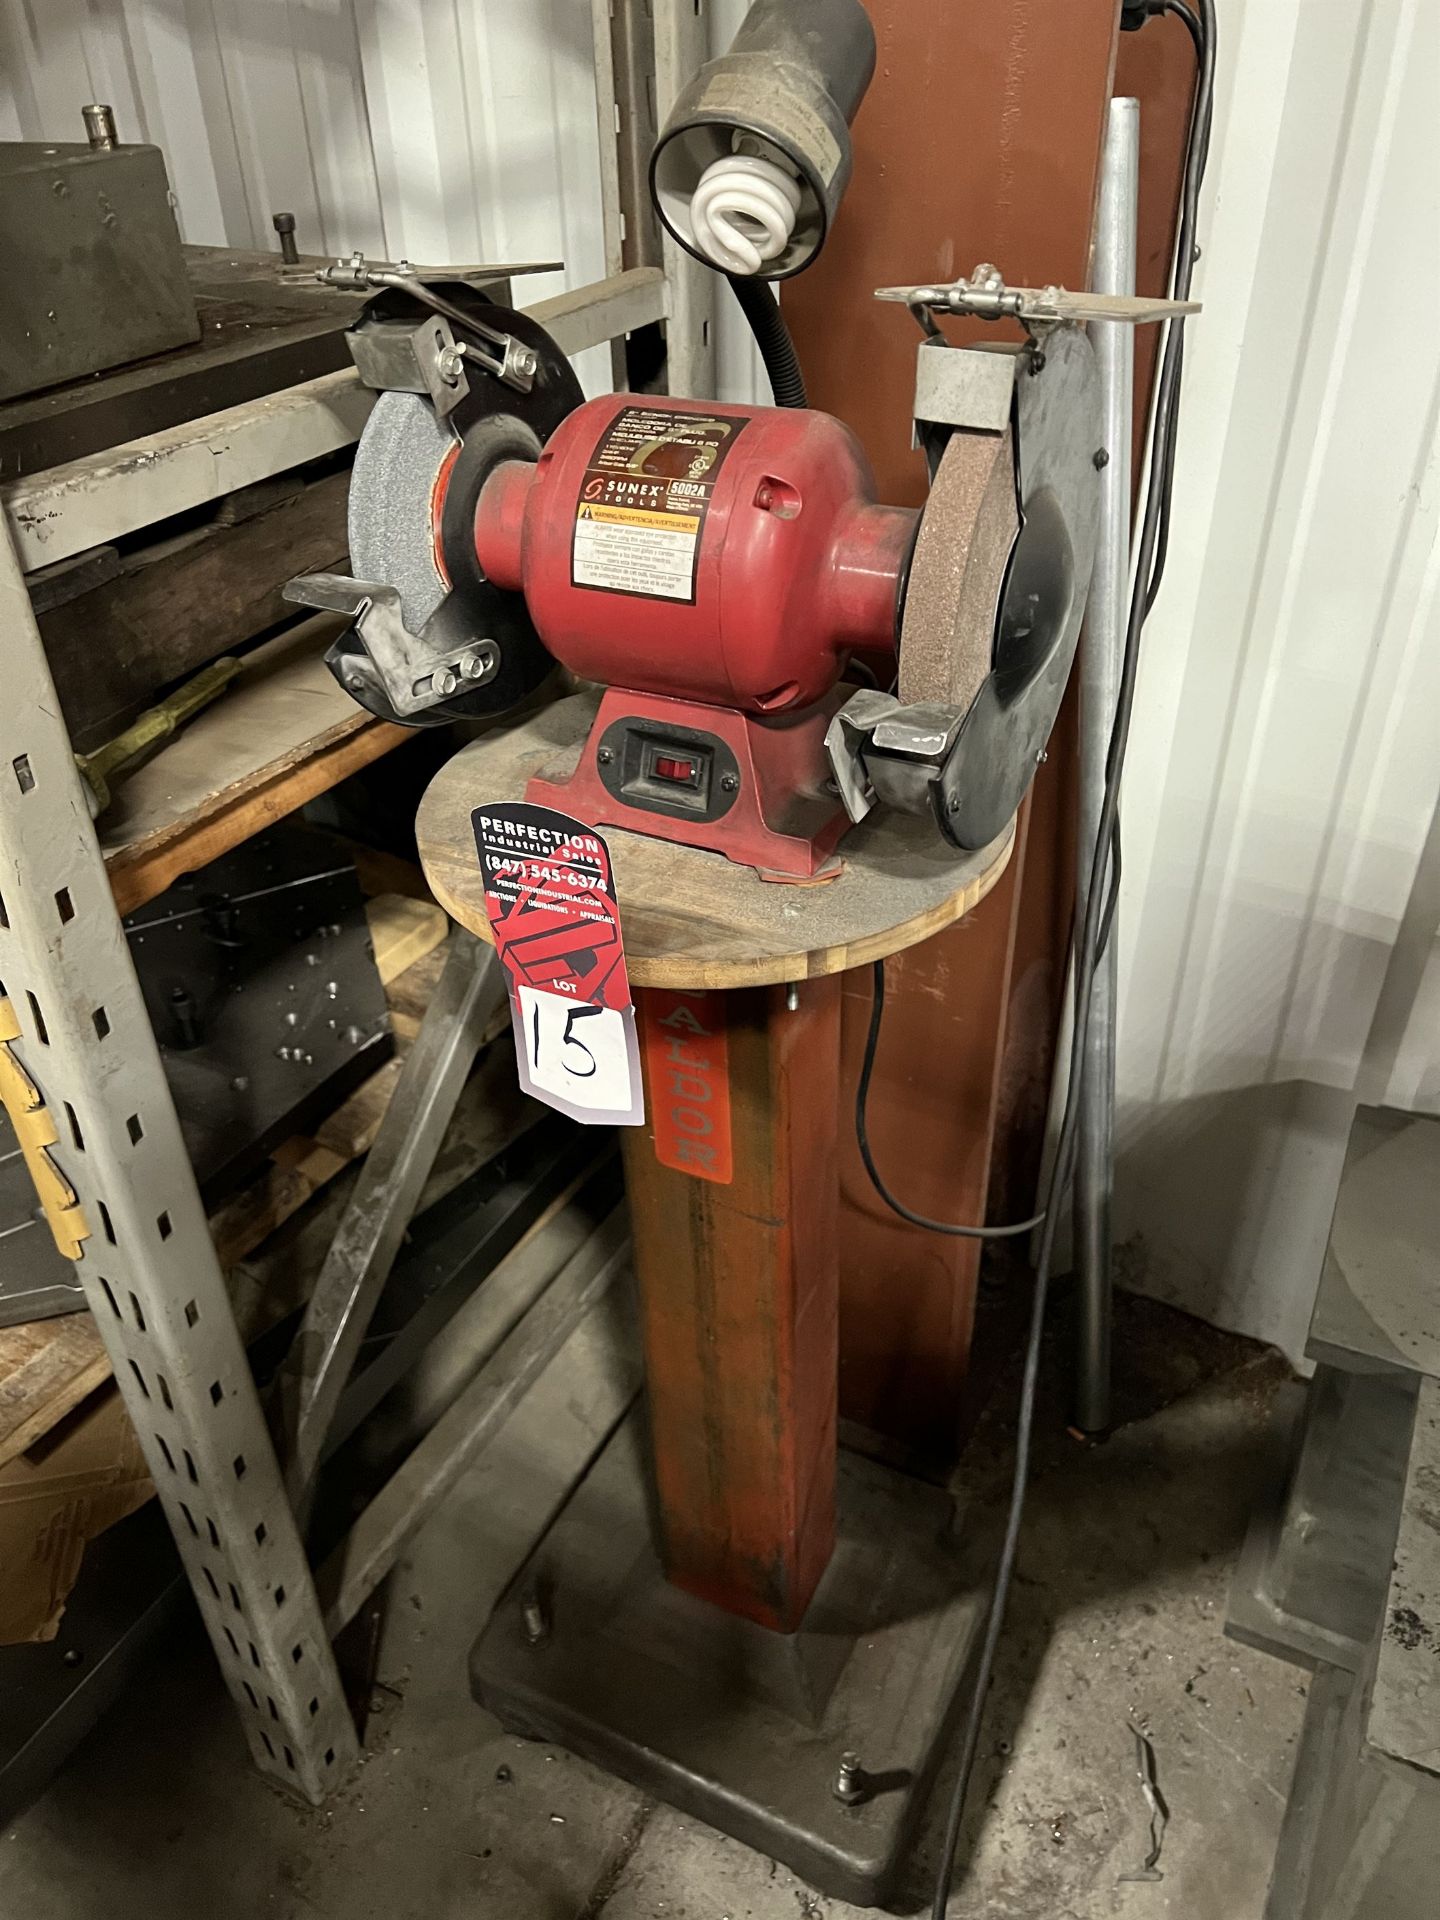 SUNEX 5002A 8" Bench Grinder, 3/4 HP, 3450 RPM (This lot is located at 1935 W. Lusher Avenue,